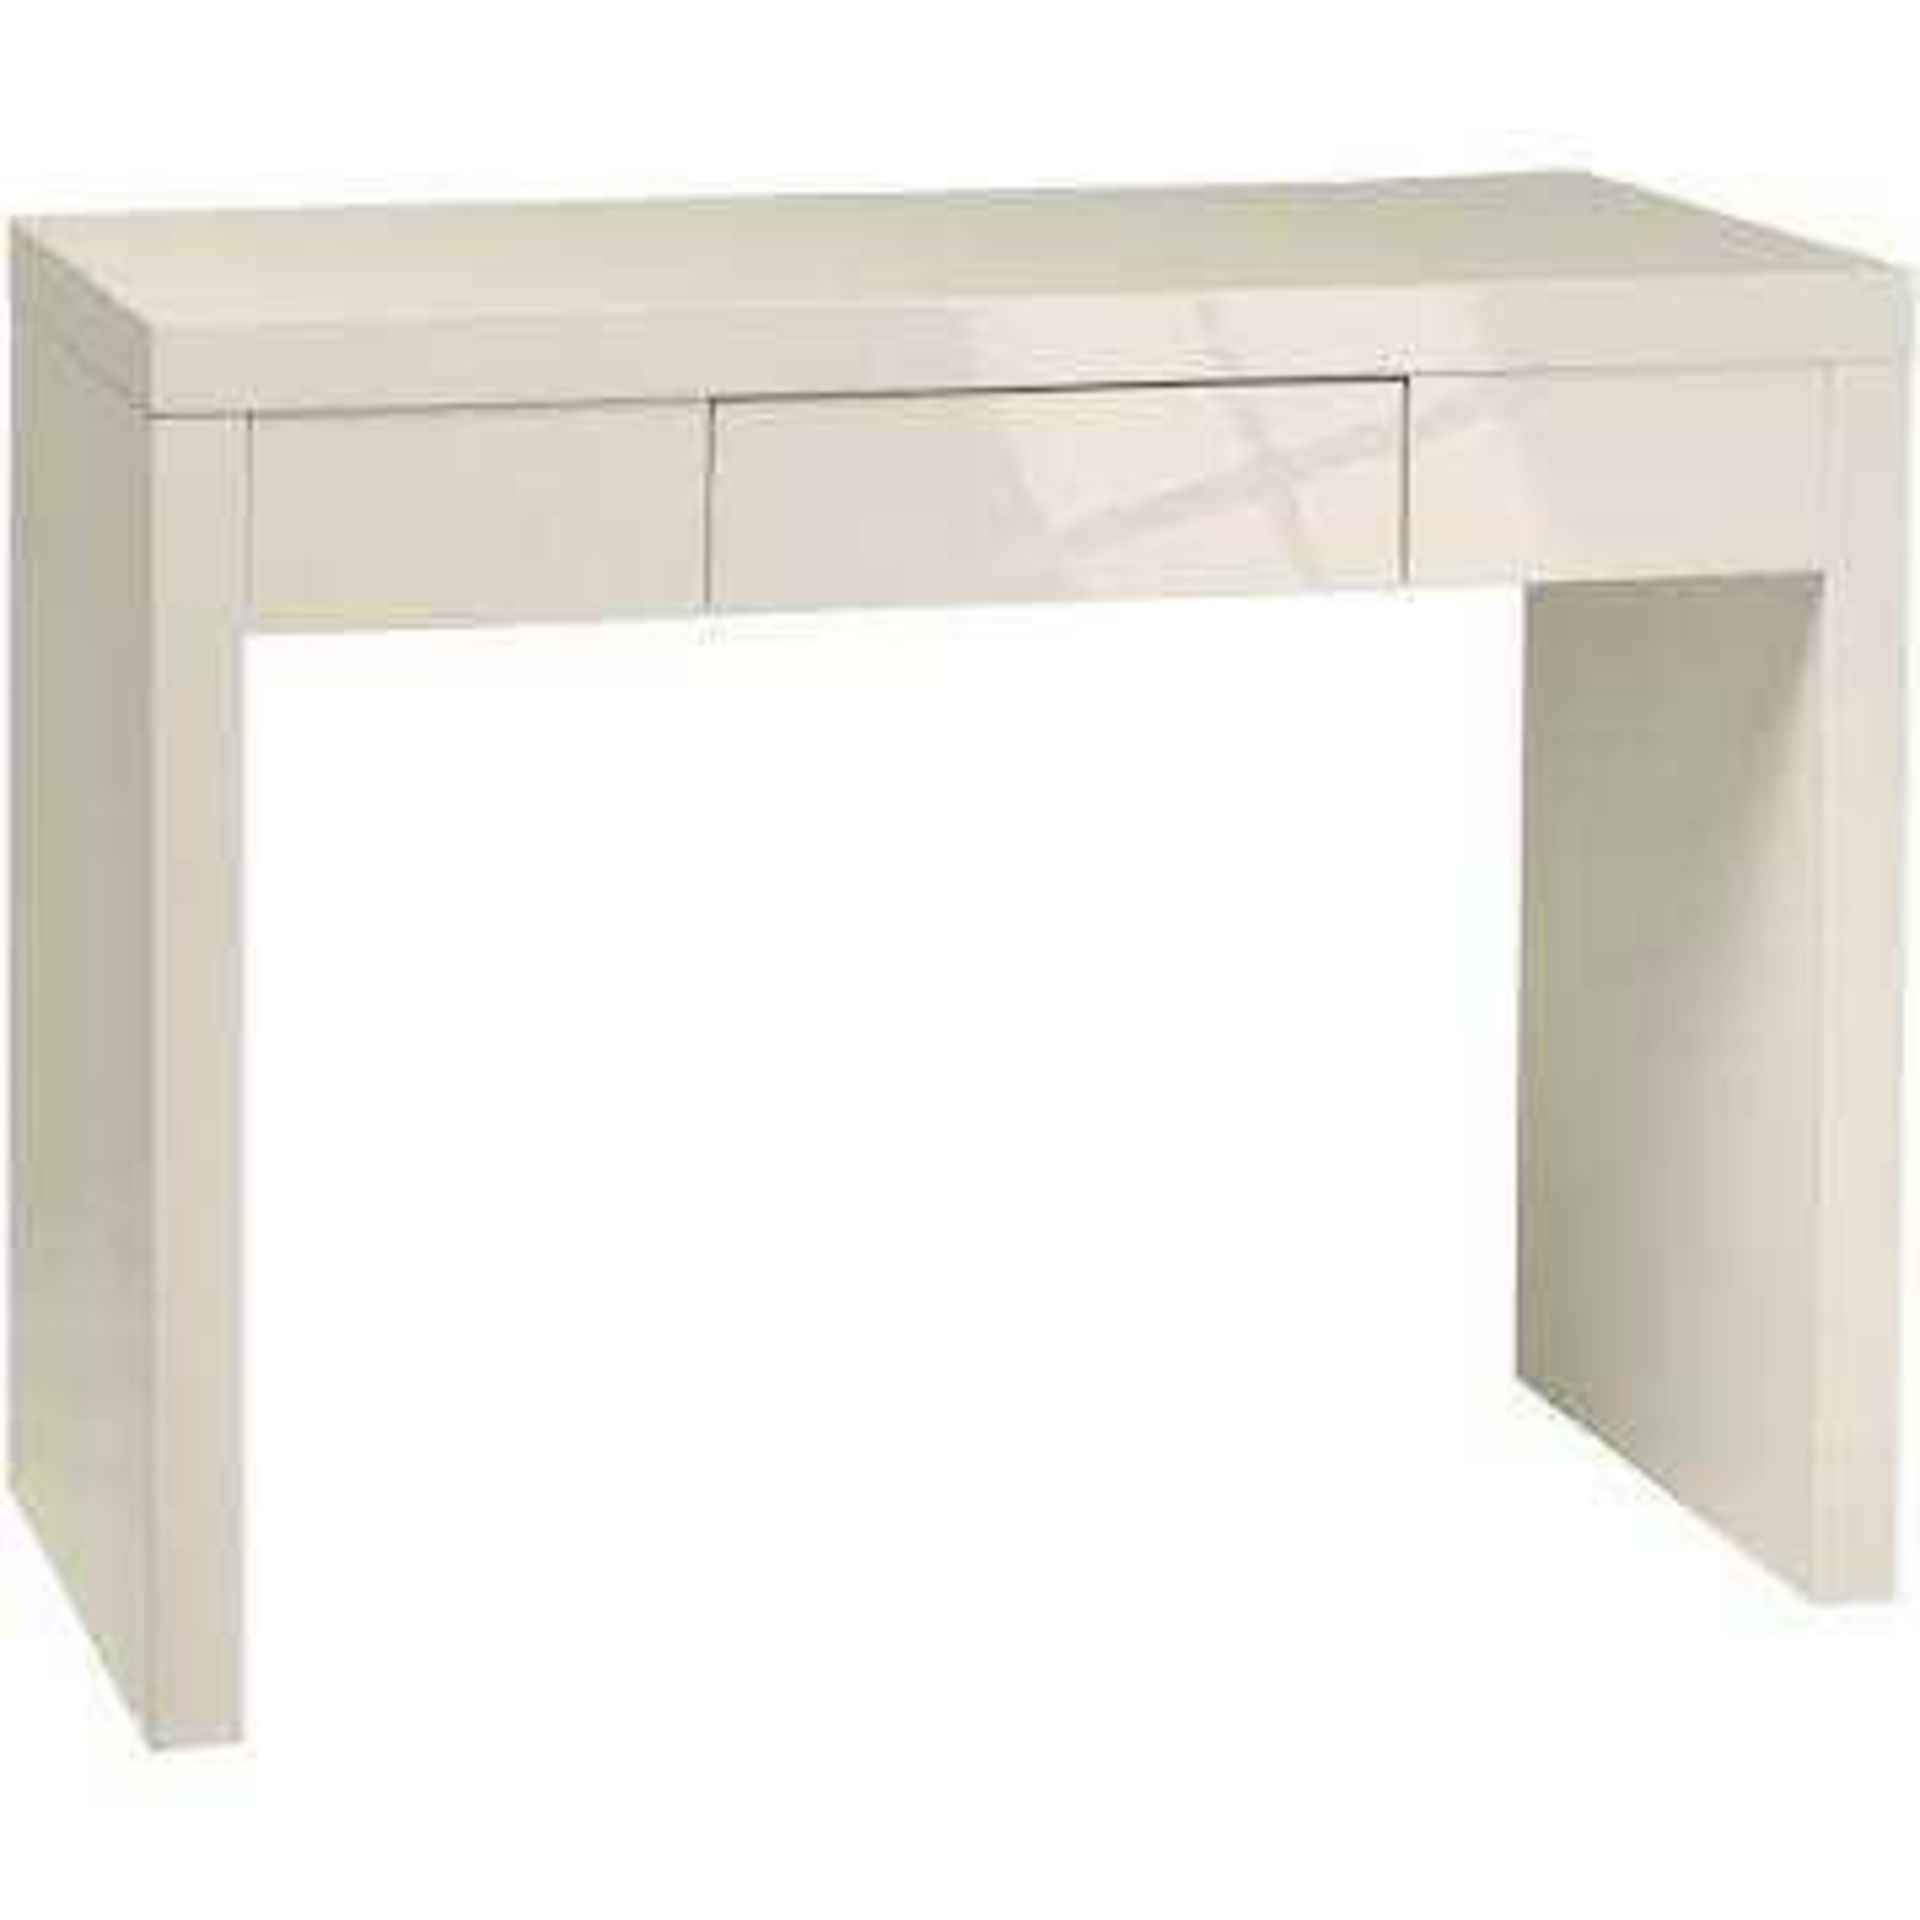 Boxed Puro Cream Console Table RRP £125(Appraisals Available On Request) (Pictures For